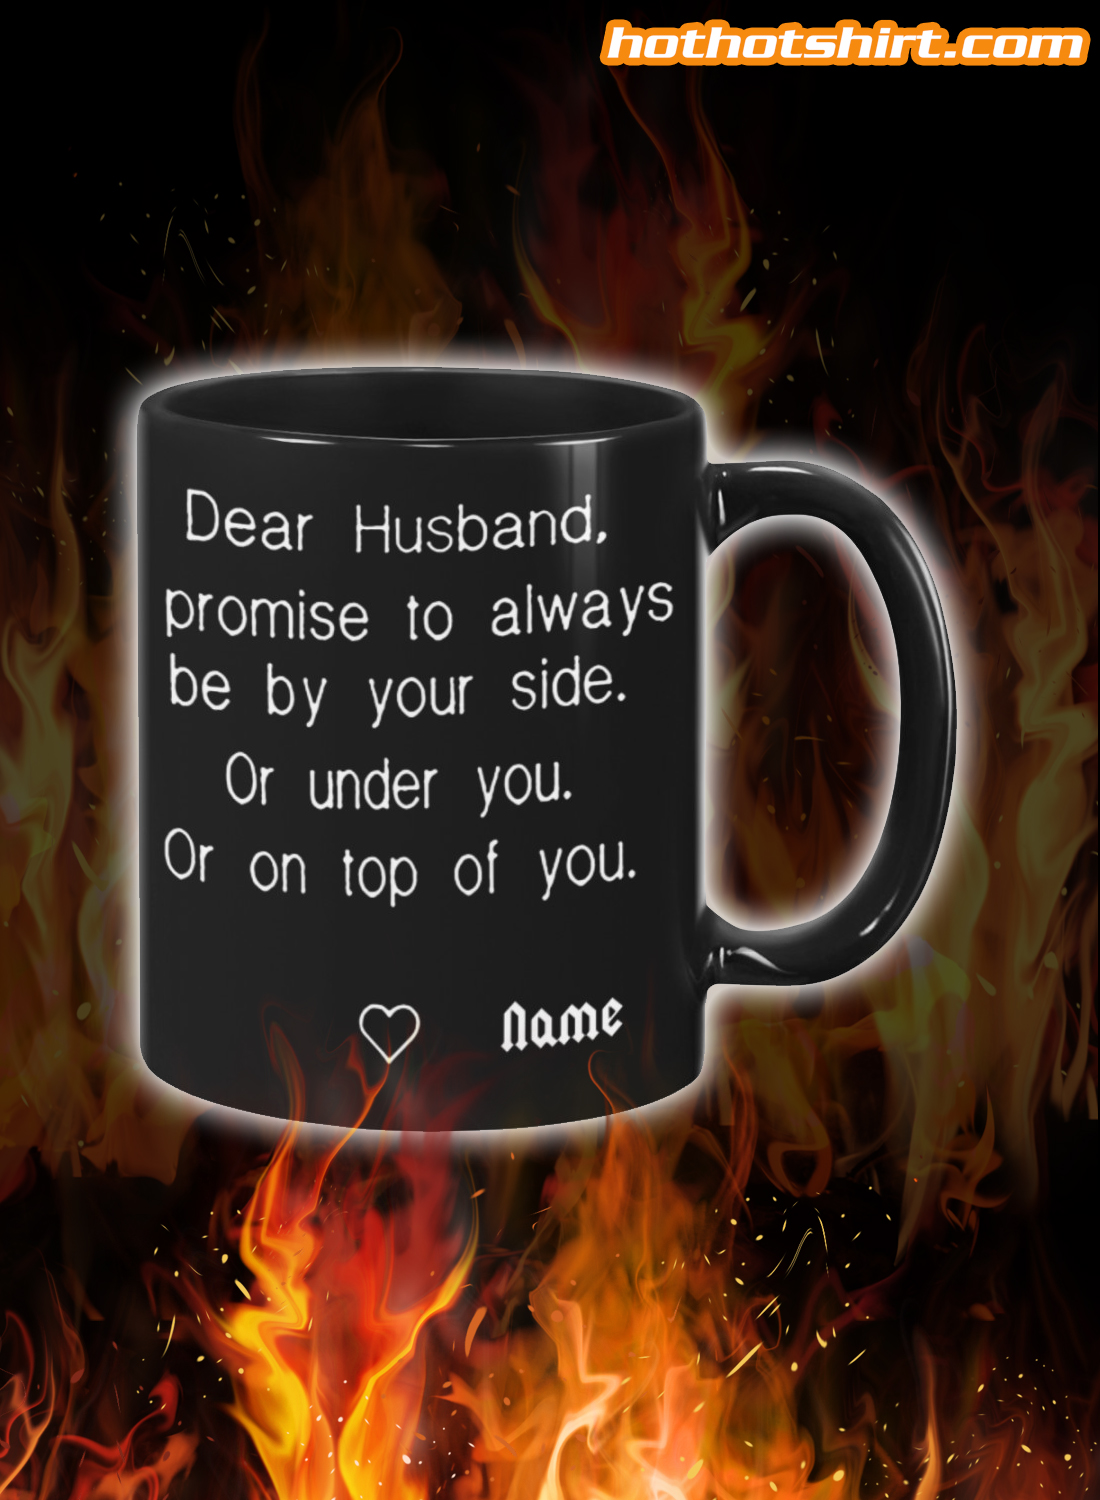 Personalized Dear husband promise to always be by your side mug